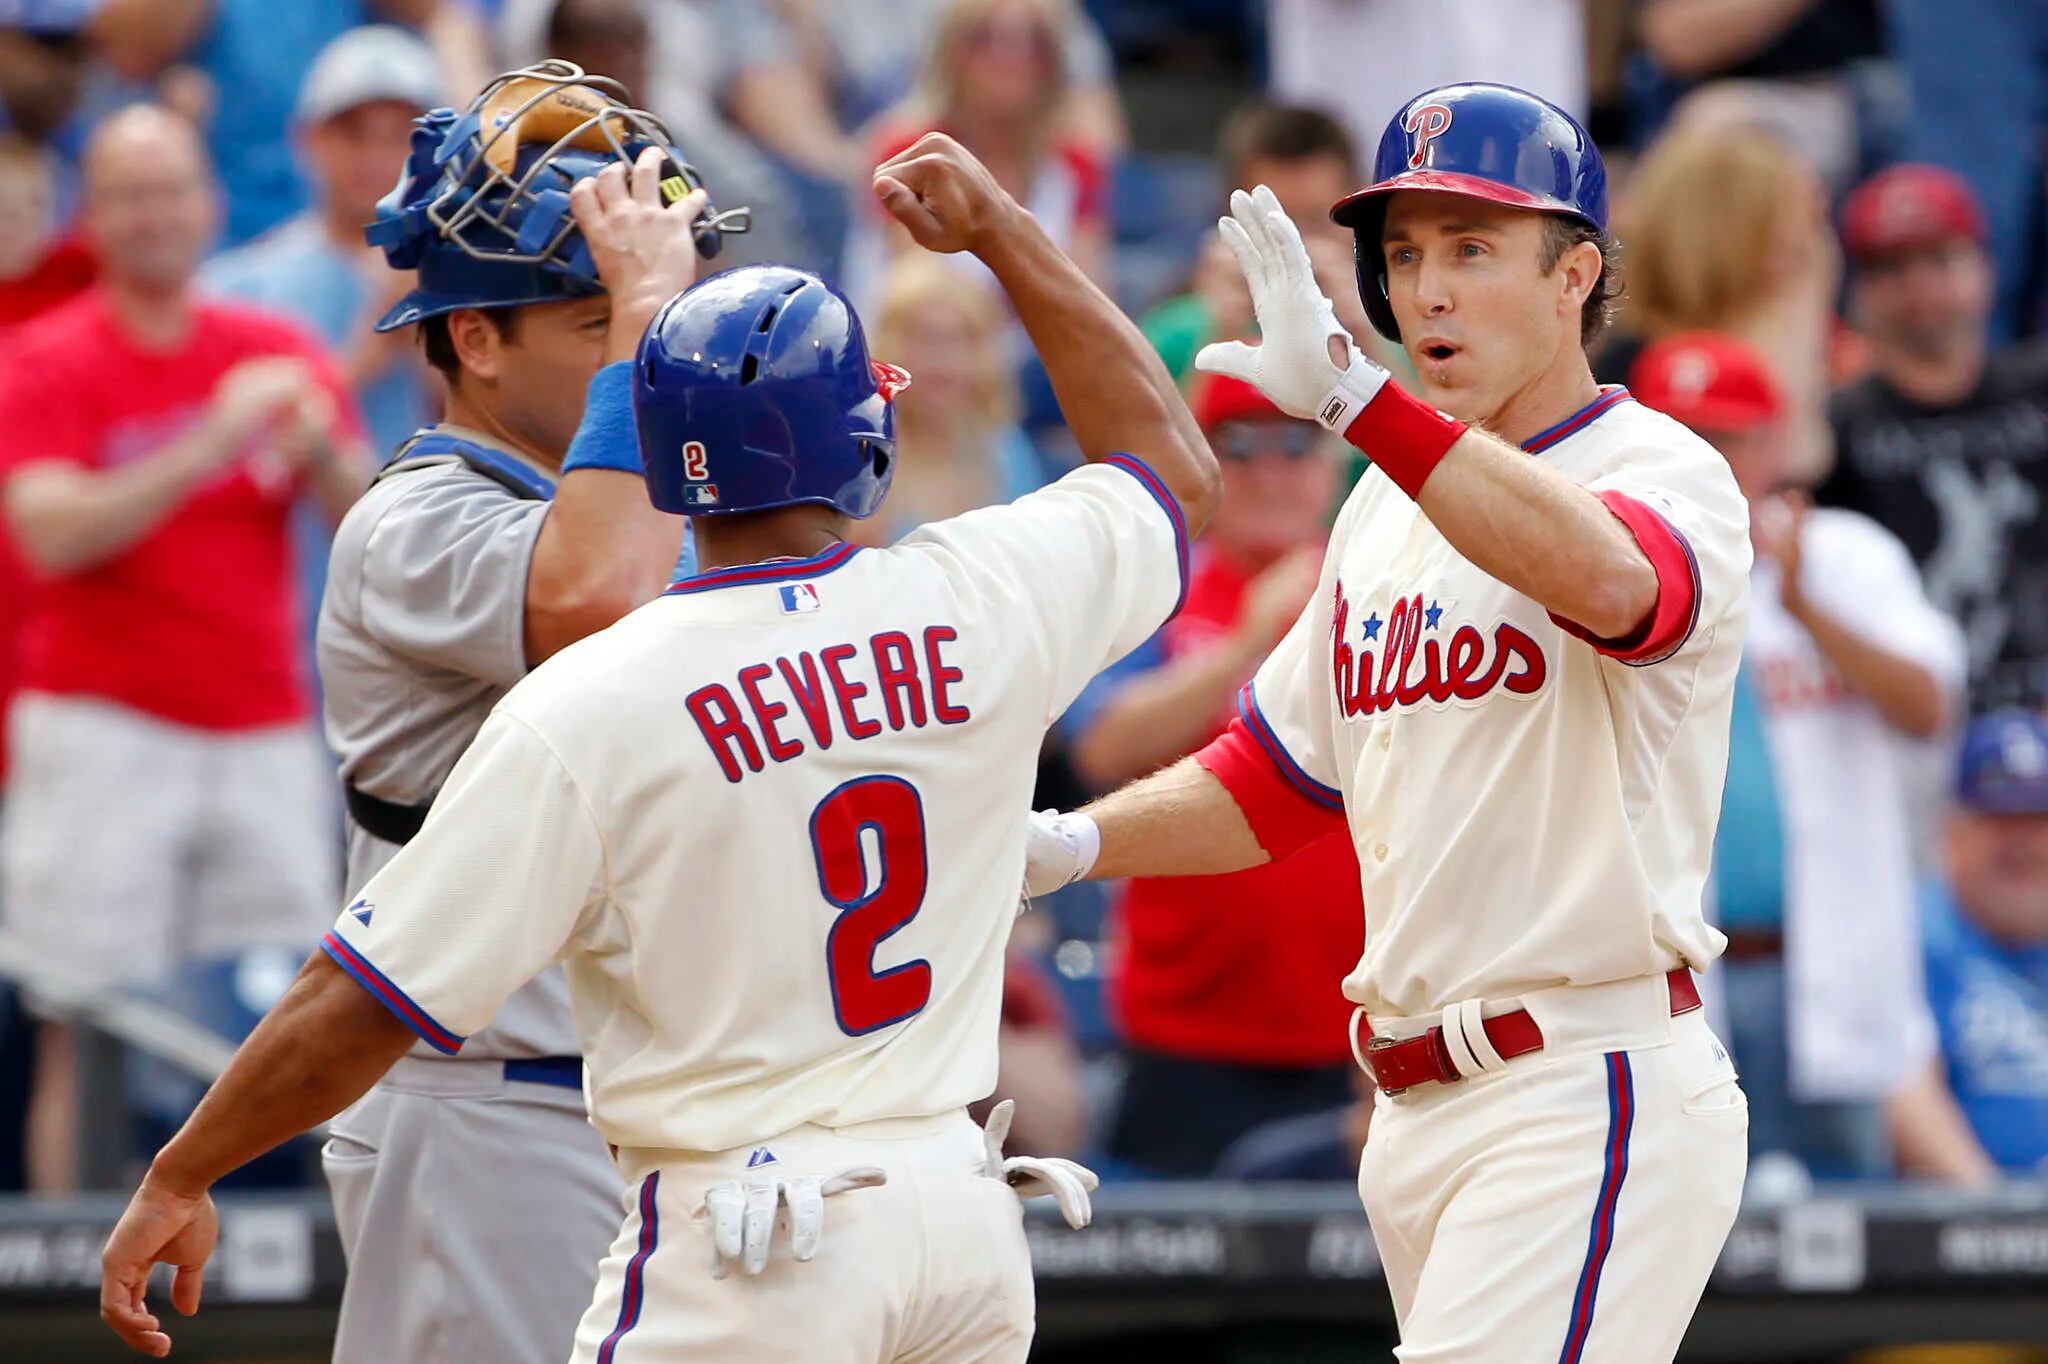 Fmr. Phillies star Chase Utley to retire at the end of 2018 - 6abc